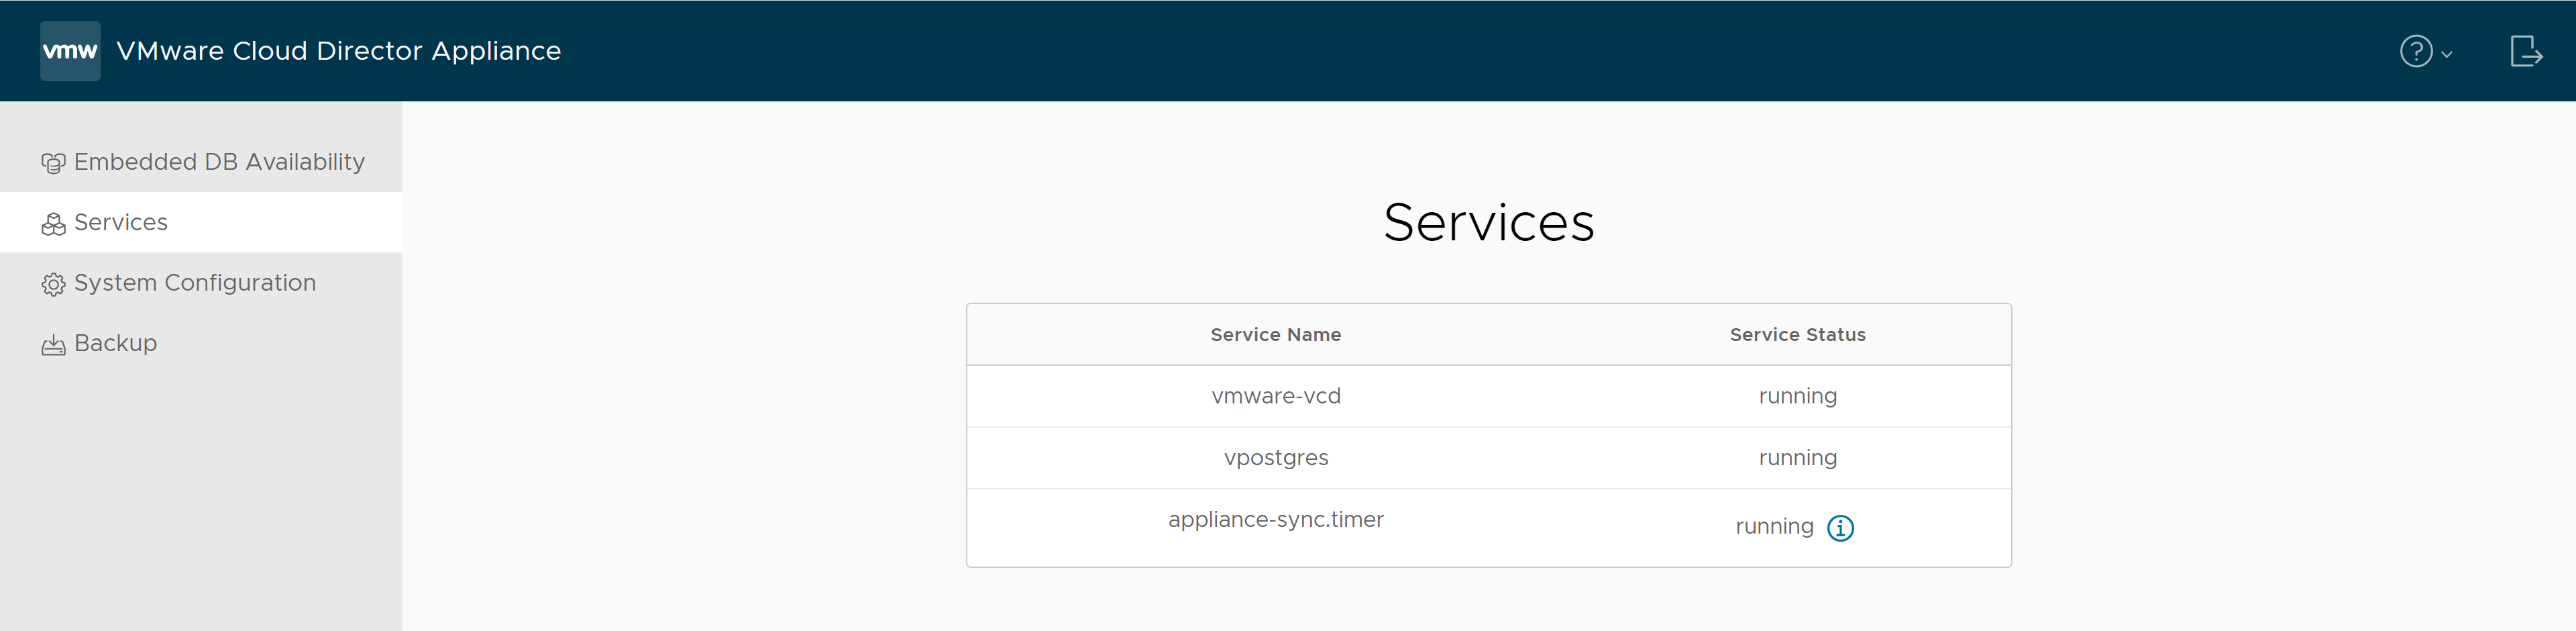 On the Services tab of the VMware Cloud Director appliance management UI, you can find service names and their statuses.